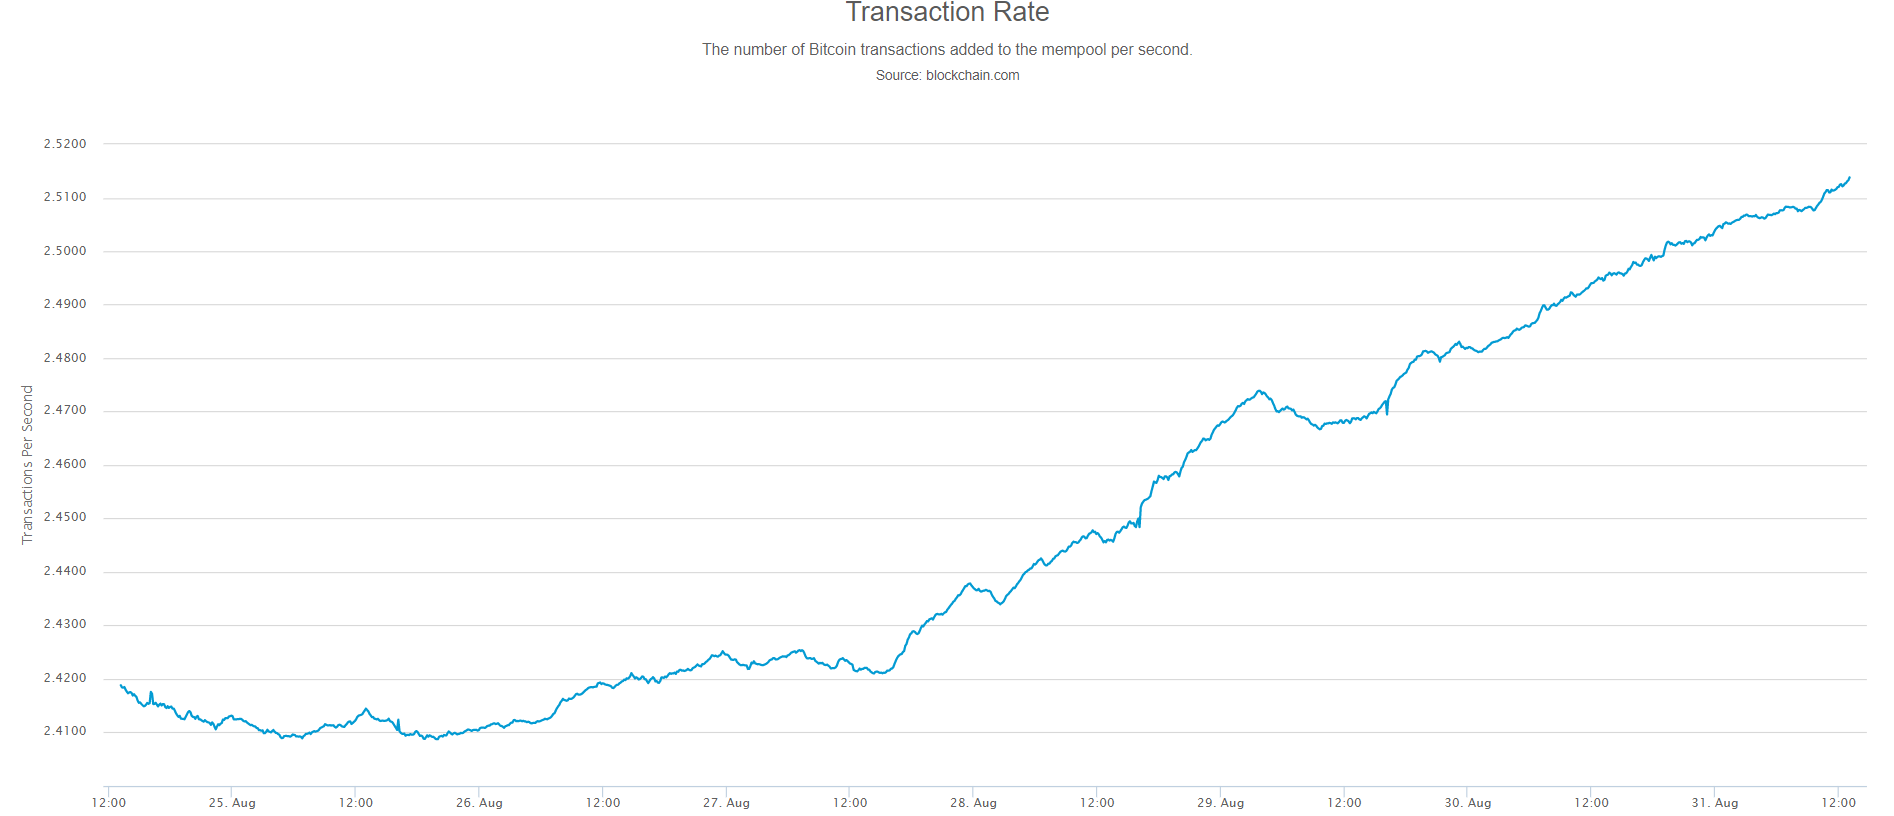 Transaction Rate